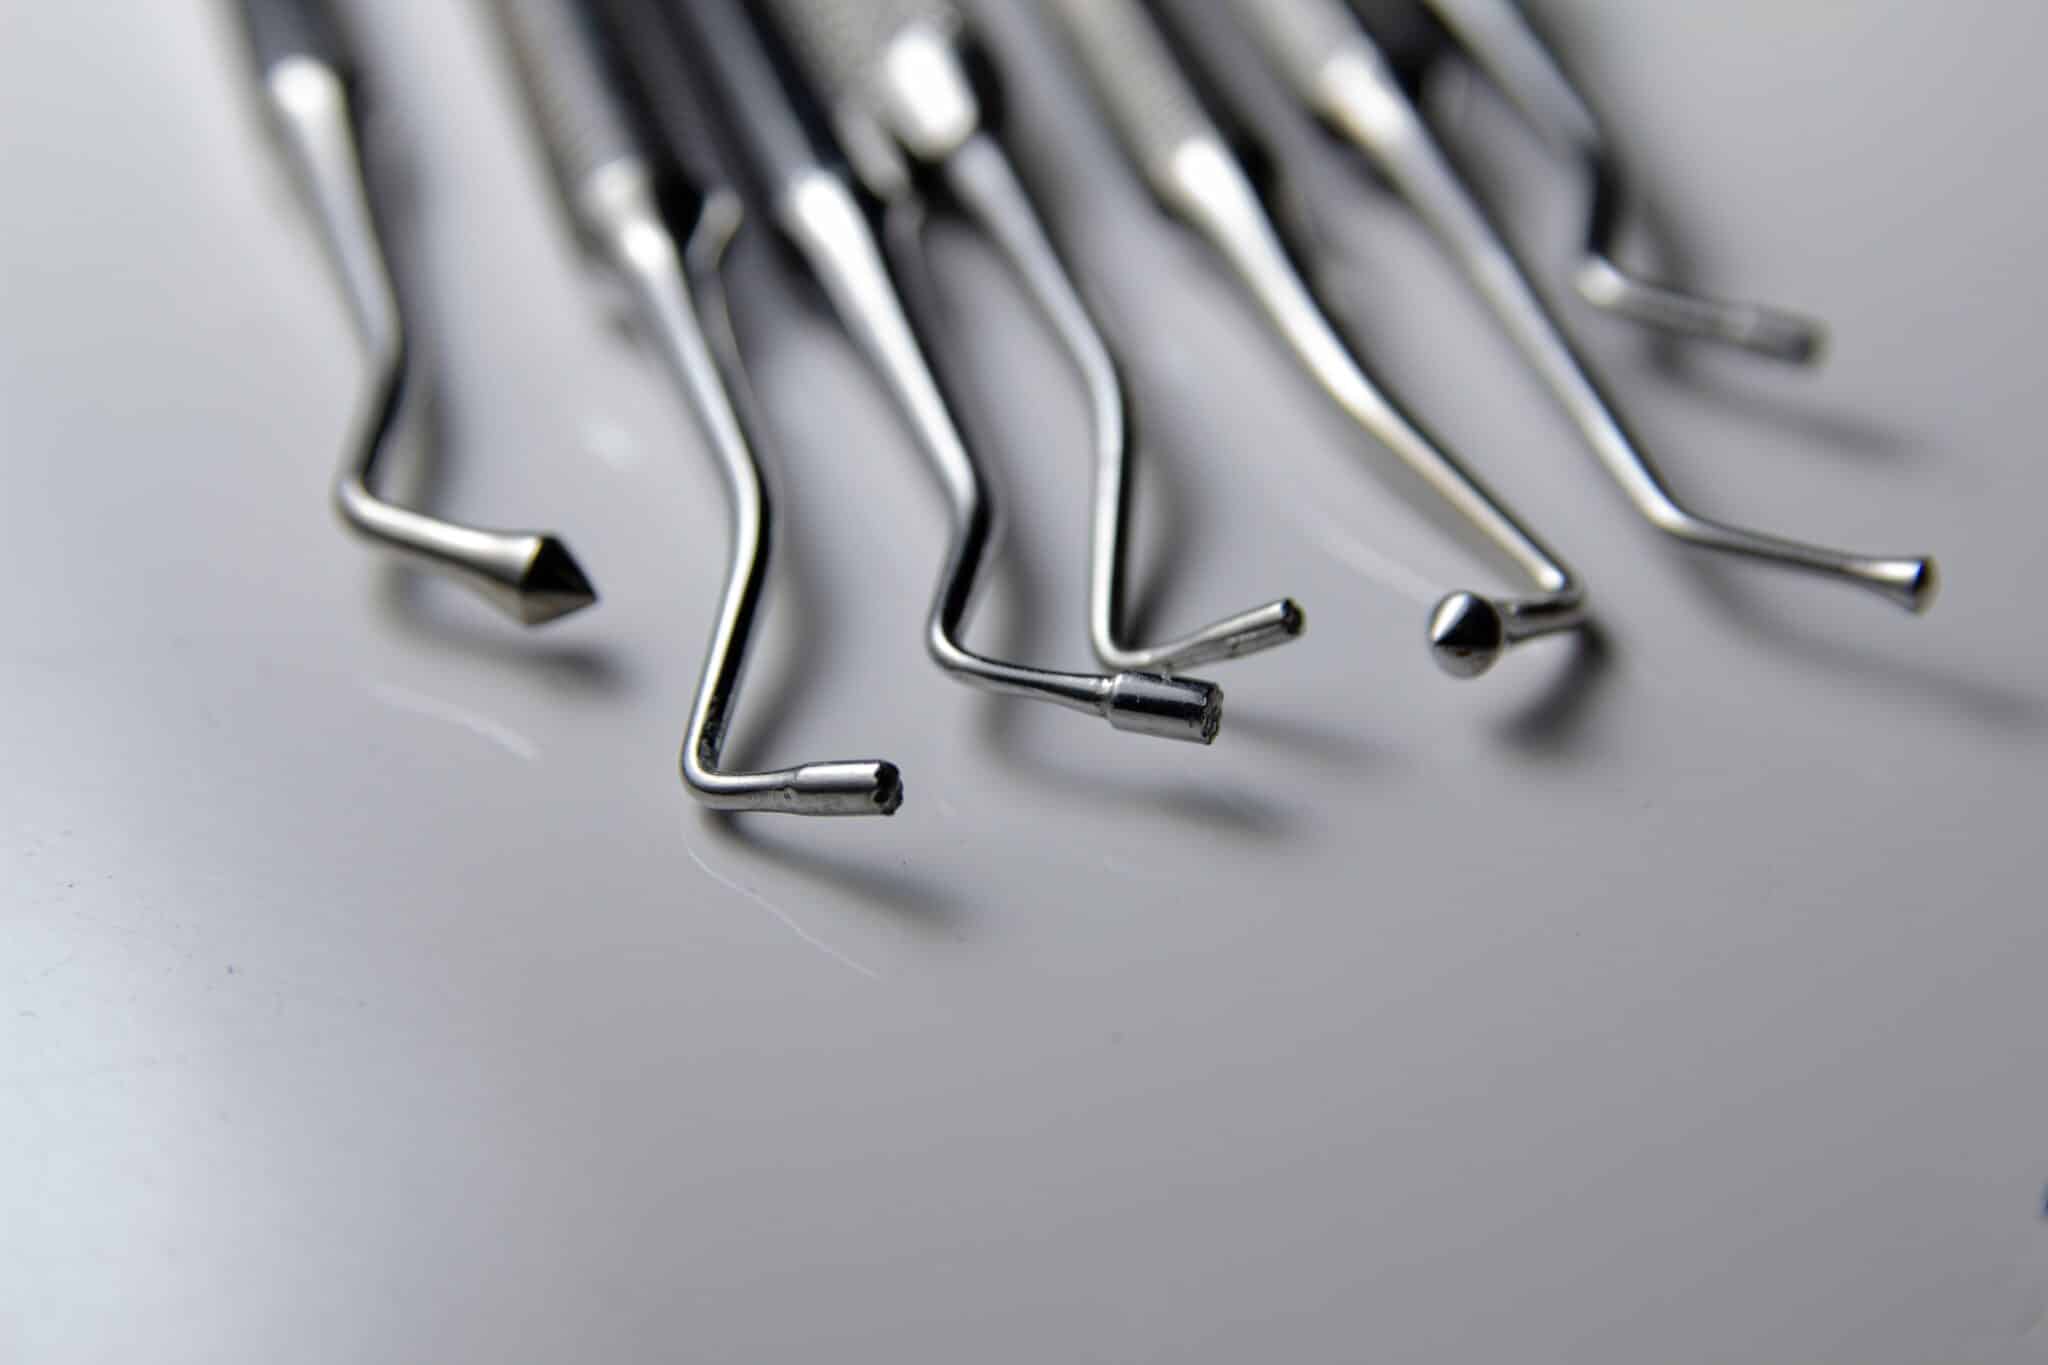 Tools used by dentists